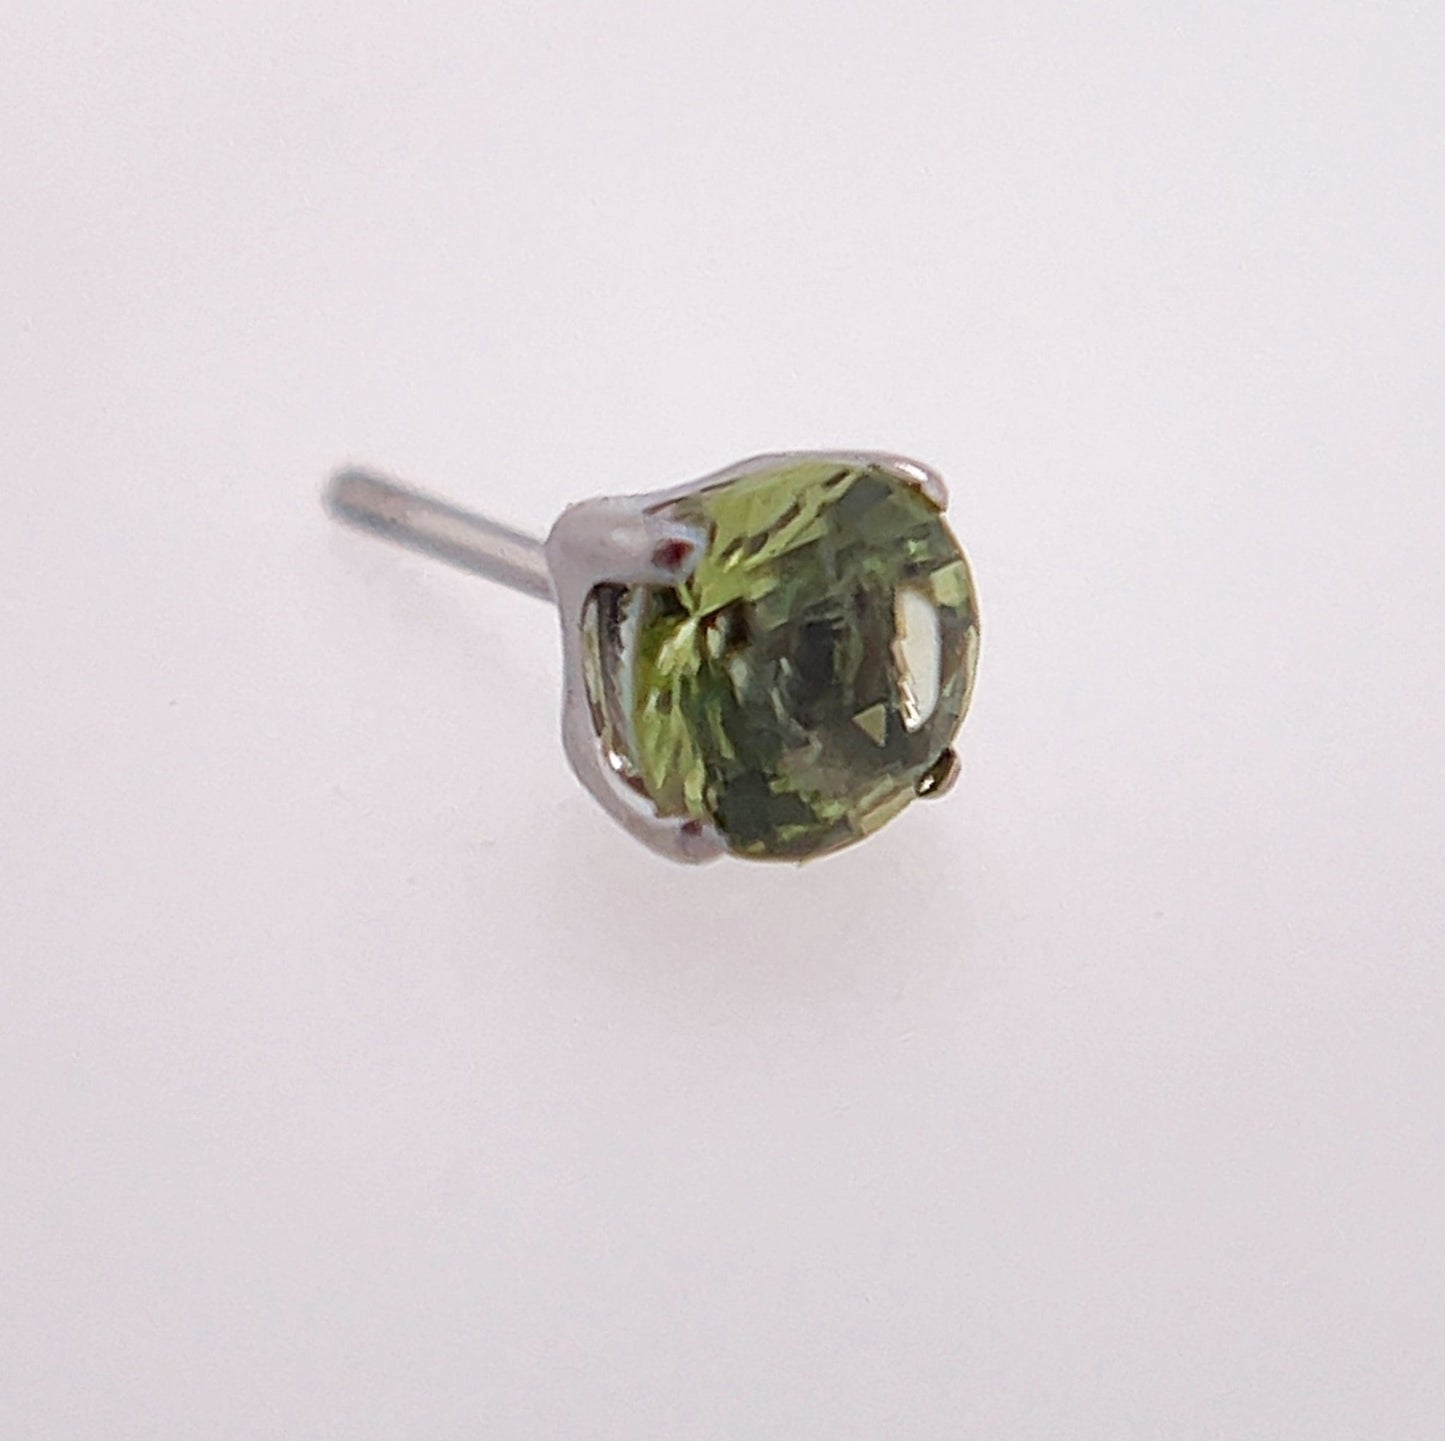 Titanium Tiffany Ends 3mm - Agave in Bloom